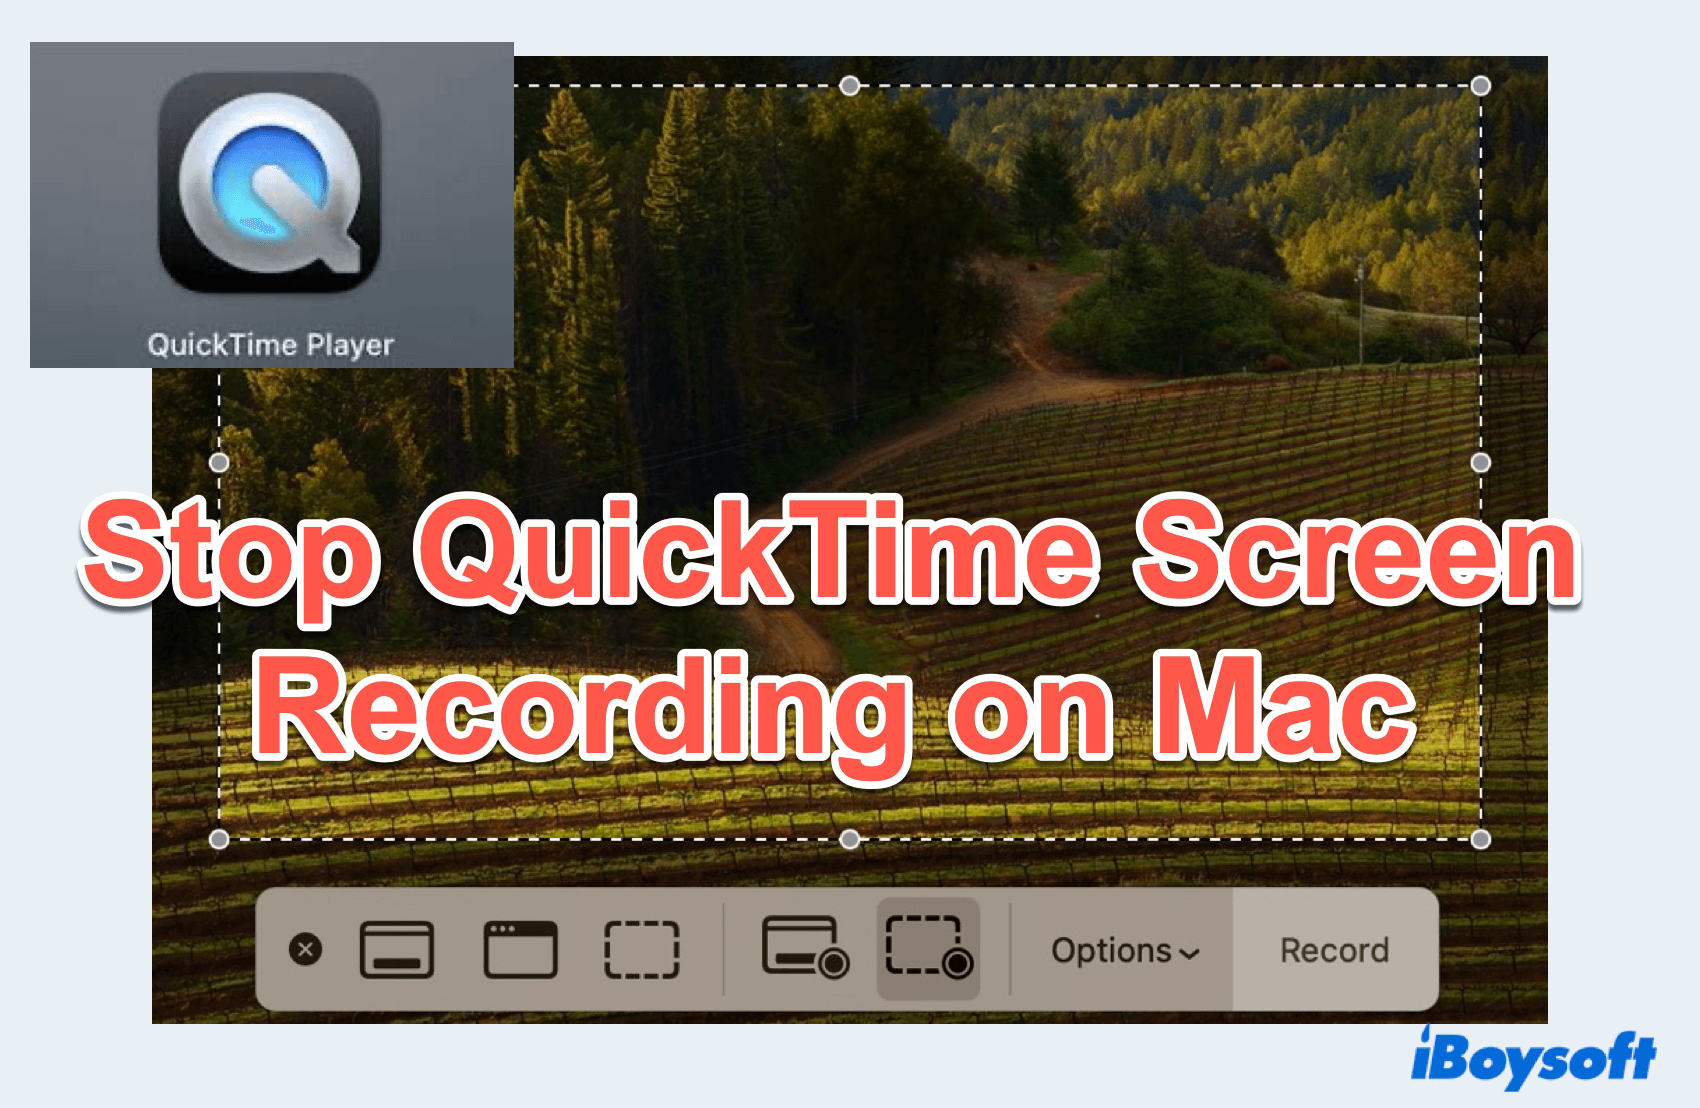 MacでQuickTime画面録画を止める方法は？